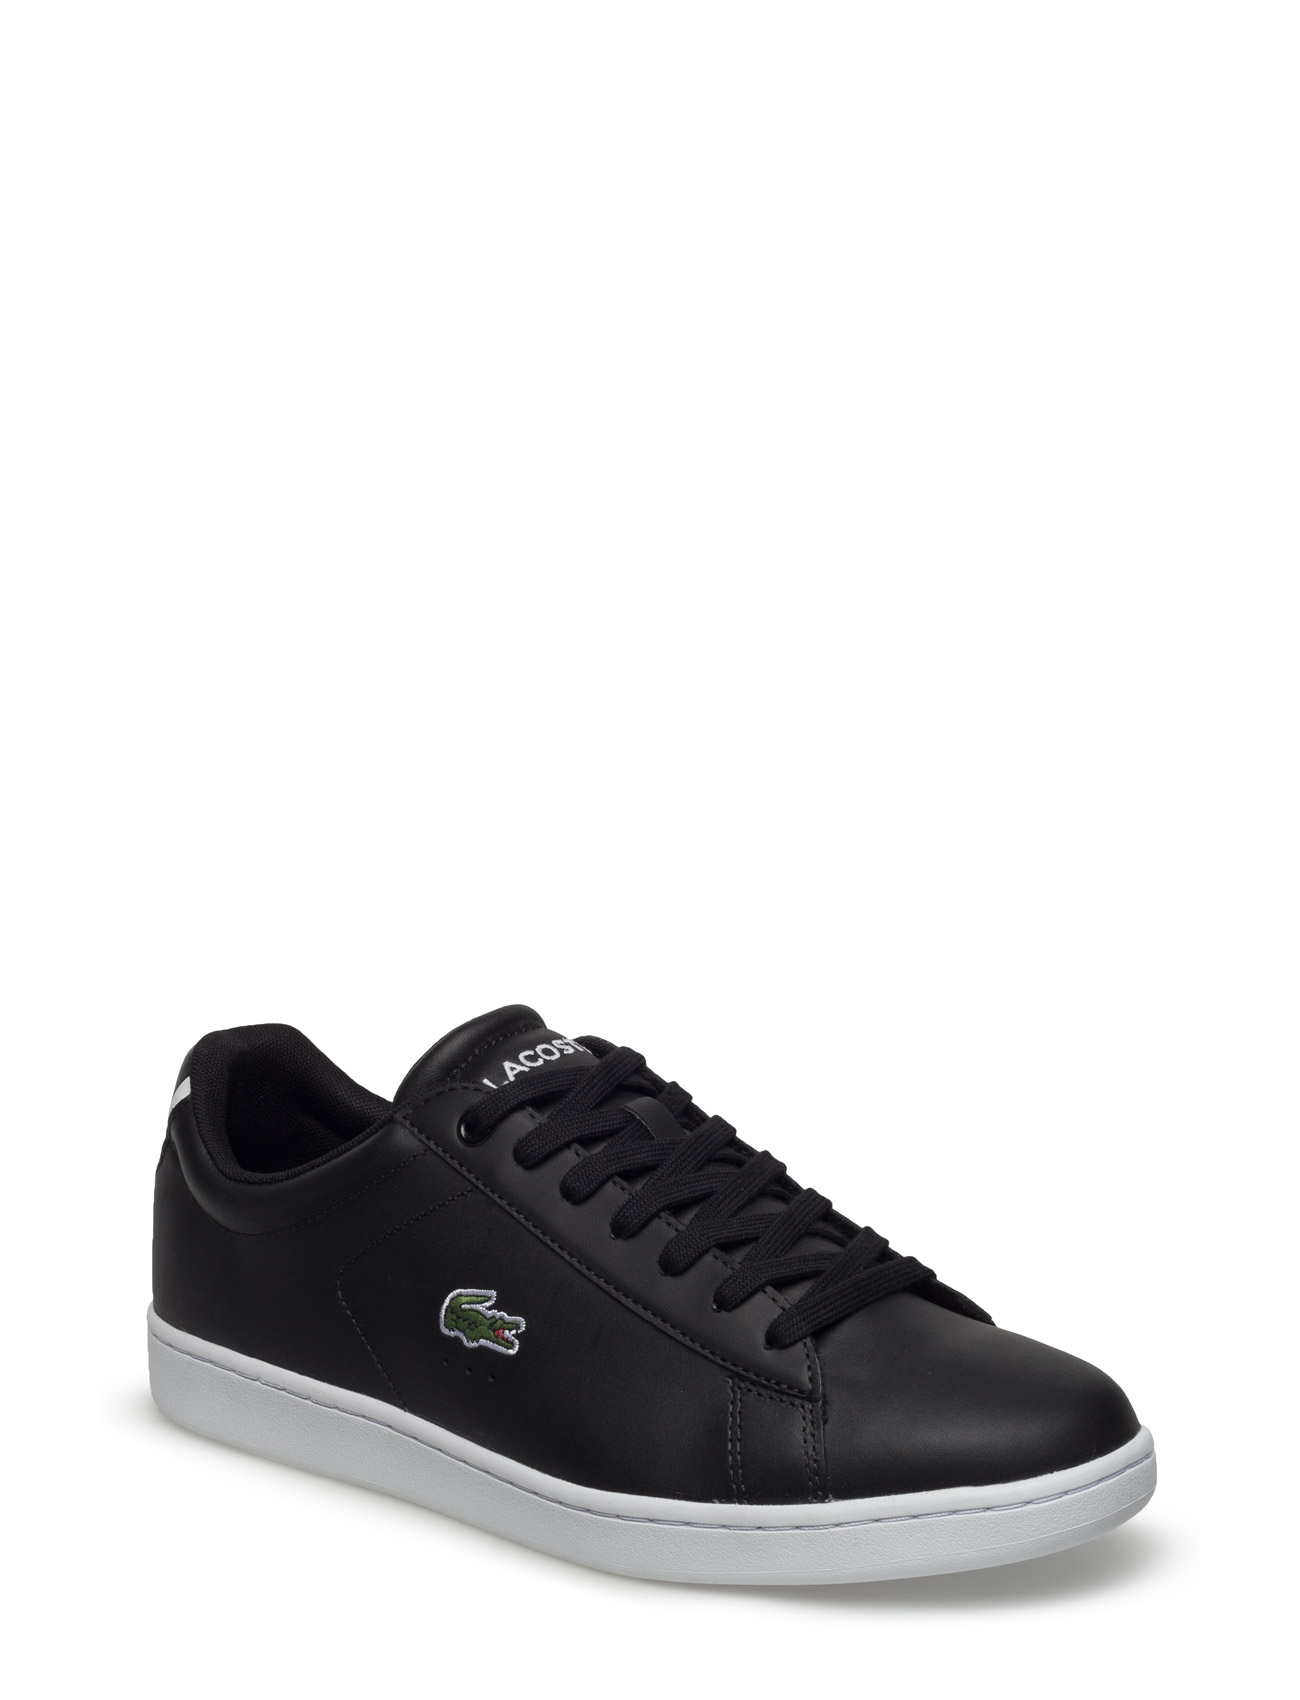 Lacoste sneakers – Carnaby Evo Sma Low-top Sort Shoes til herre i Sort - Pashion.dk